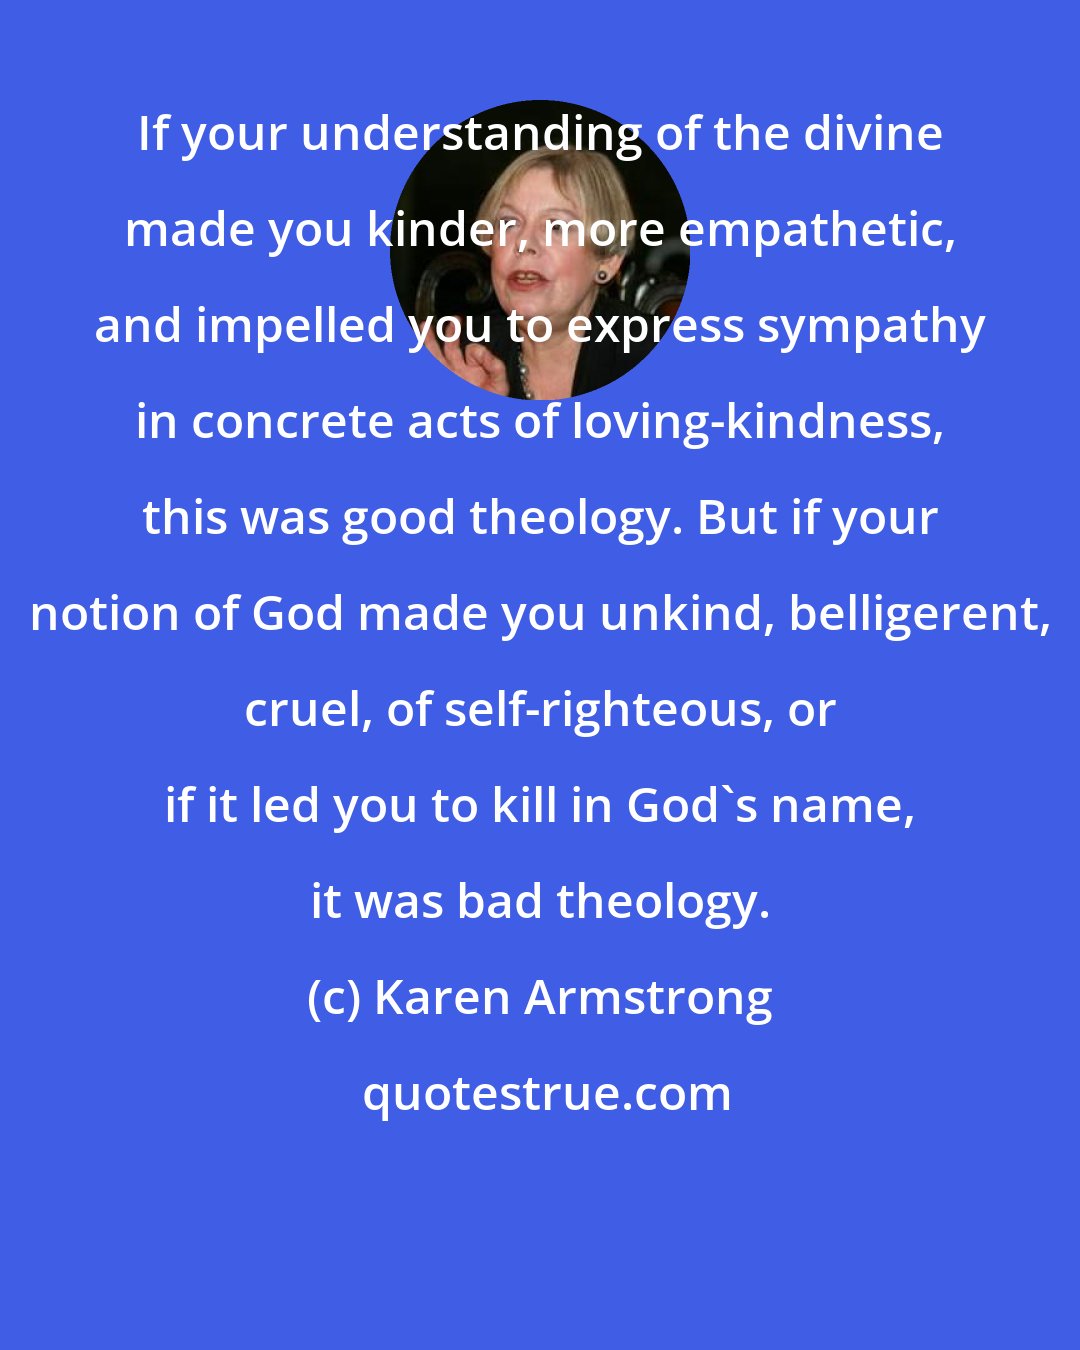 Karen Armstrong: If your understanding of the divine made you kinder, more empathetic, and impelled you to express sympathy in concrete acts of loving-kindness, this was good theology. But if your notion of God made you unkind, belligerent, cruel, of self-righteous, or if it led you to kill in God's name, it was bad theology.